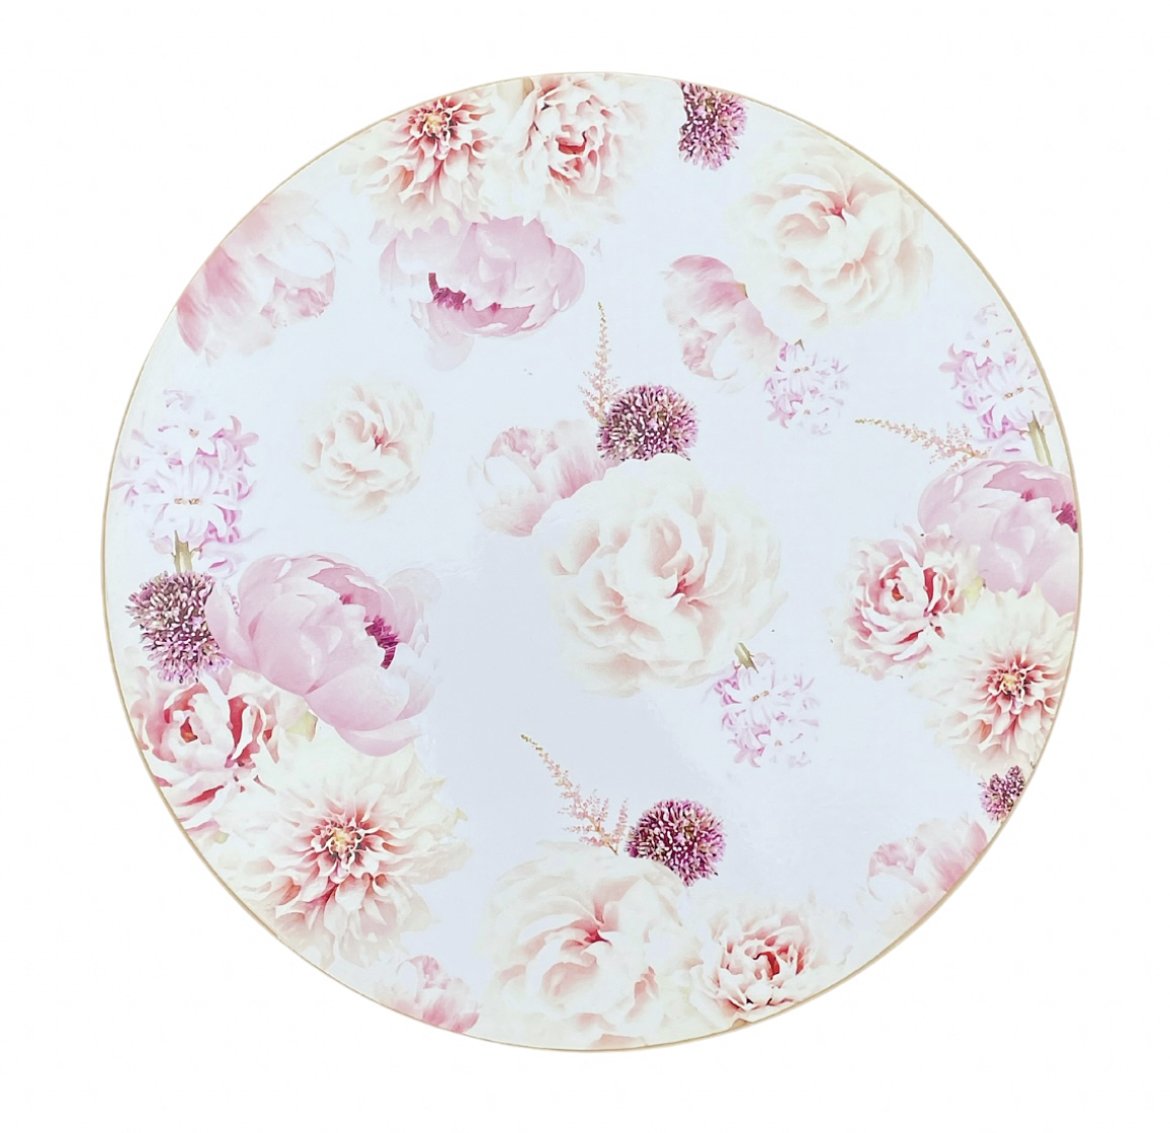 Pink Floral Placemat Hire